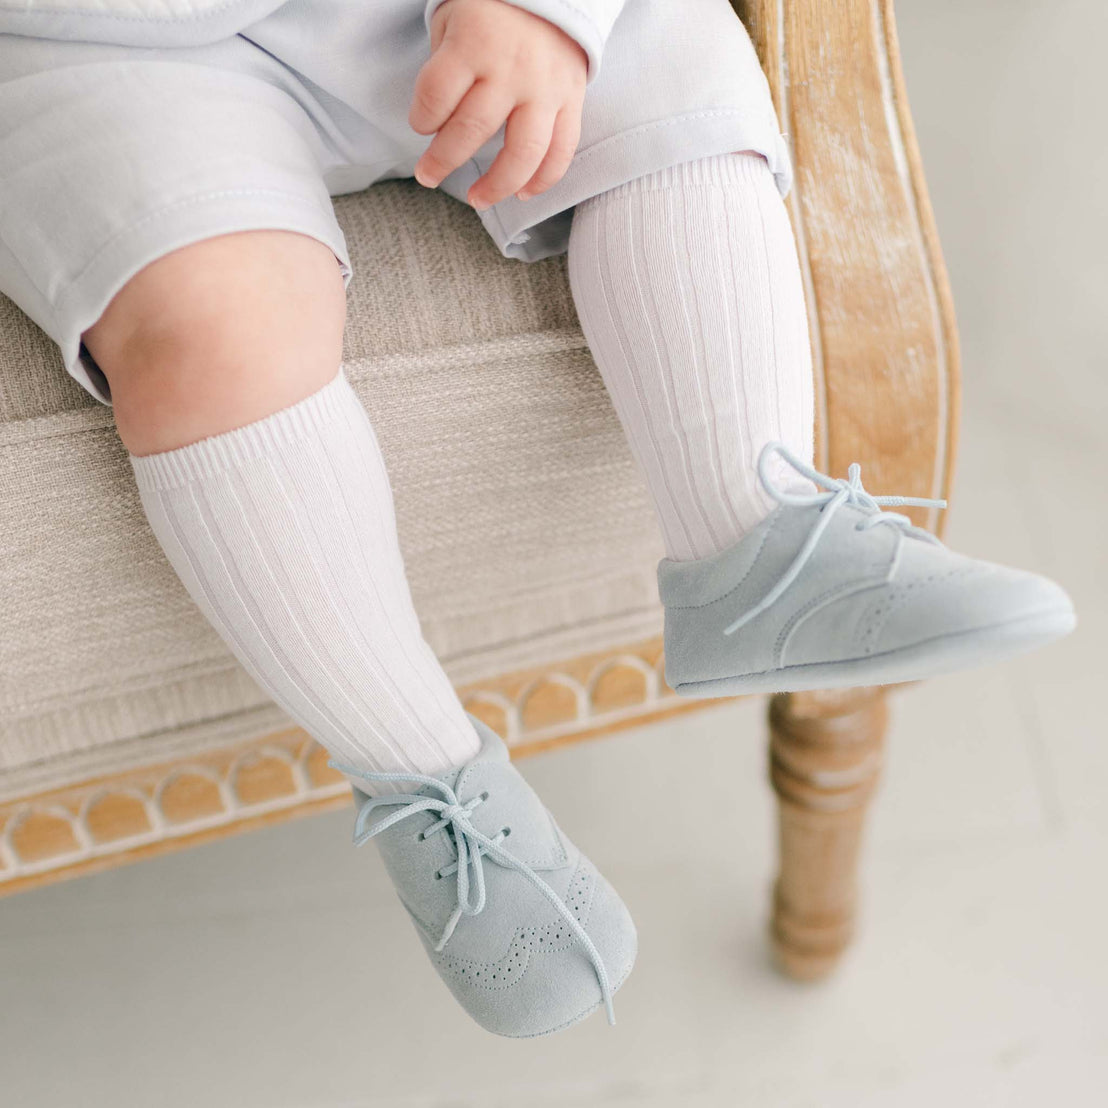 Baby boy wearing the Harrison Suede Shoes crafted from a super soft, light blue suede with detailed edging. The boy is also wearing knee high white socks